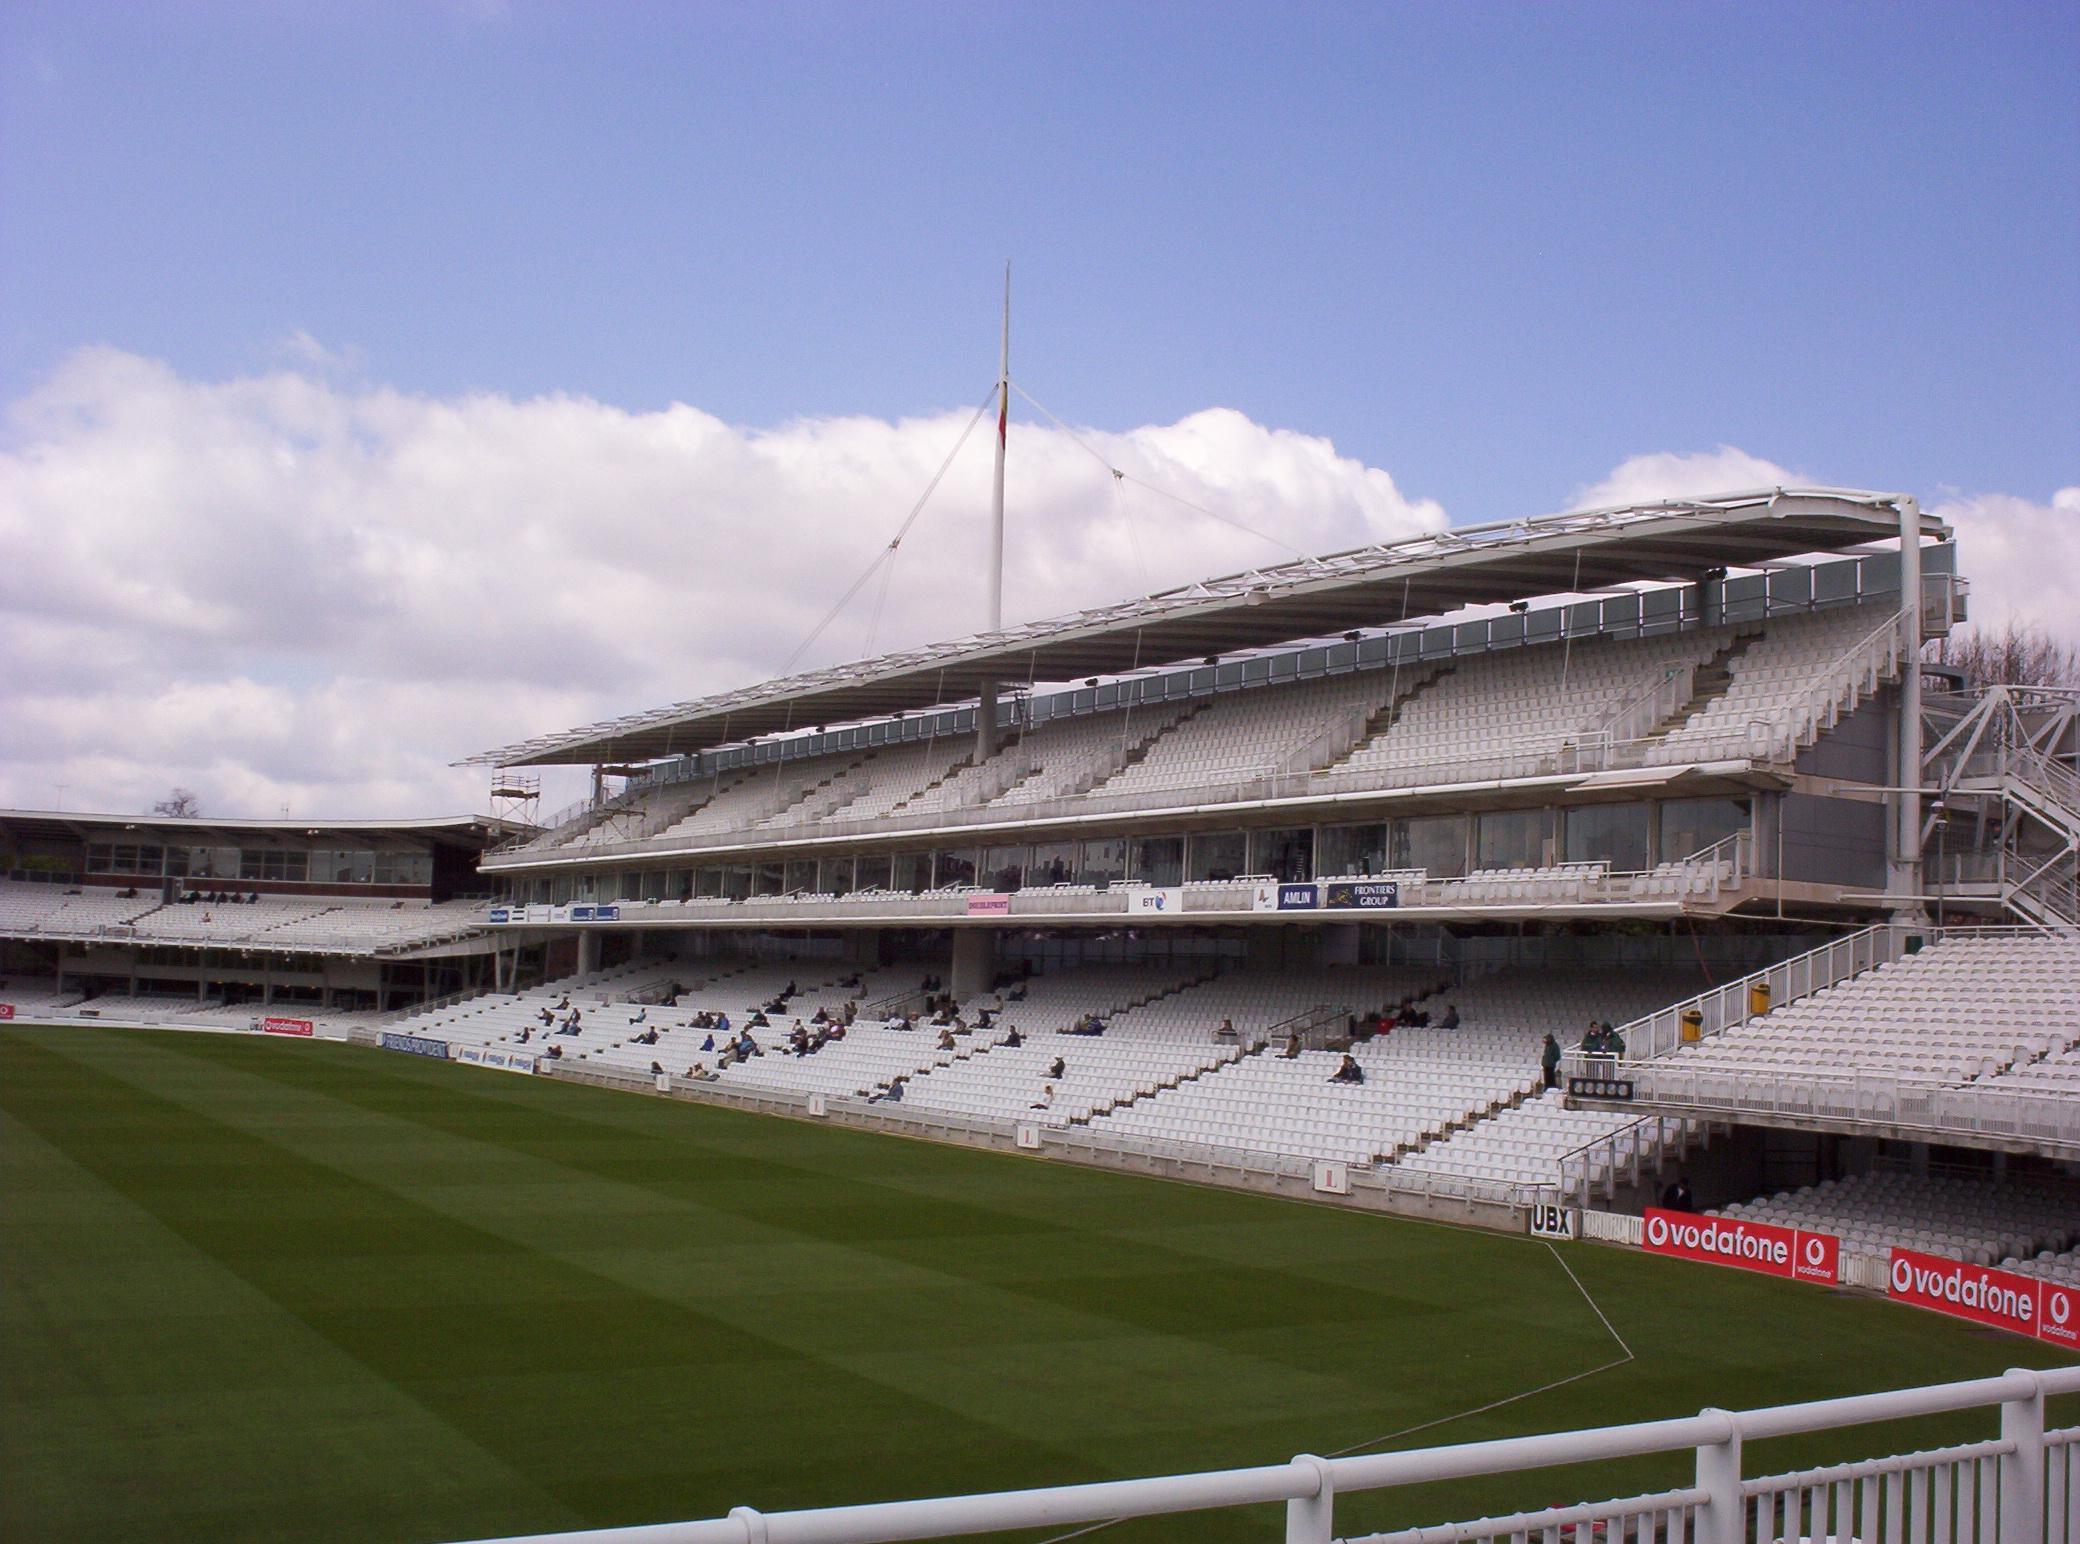 File:Lord's Cricket Ground Grand Stand.jpg - Wikimedia Commons